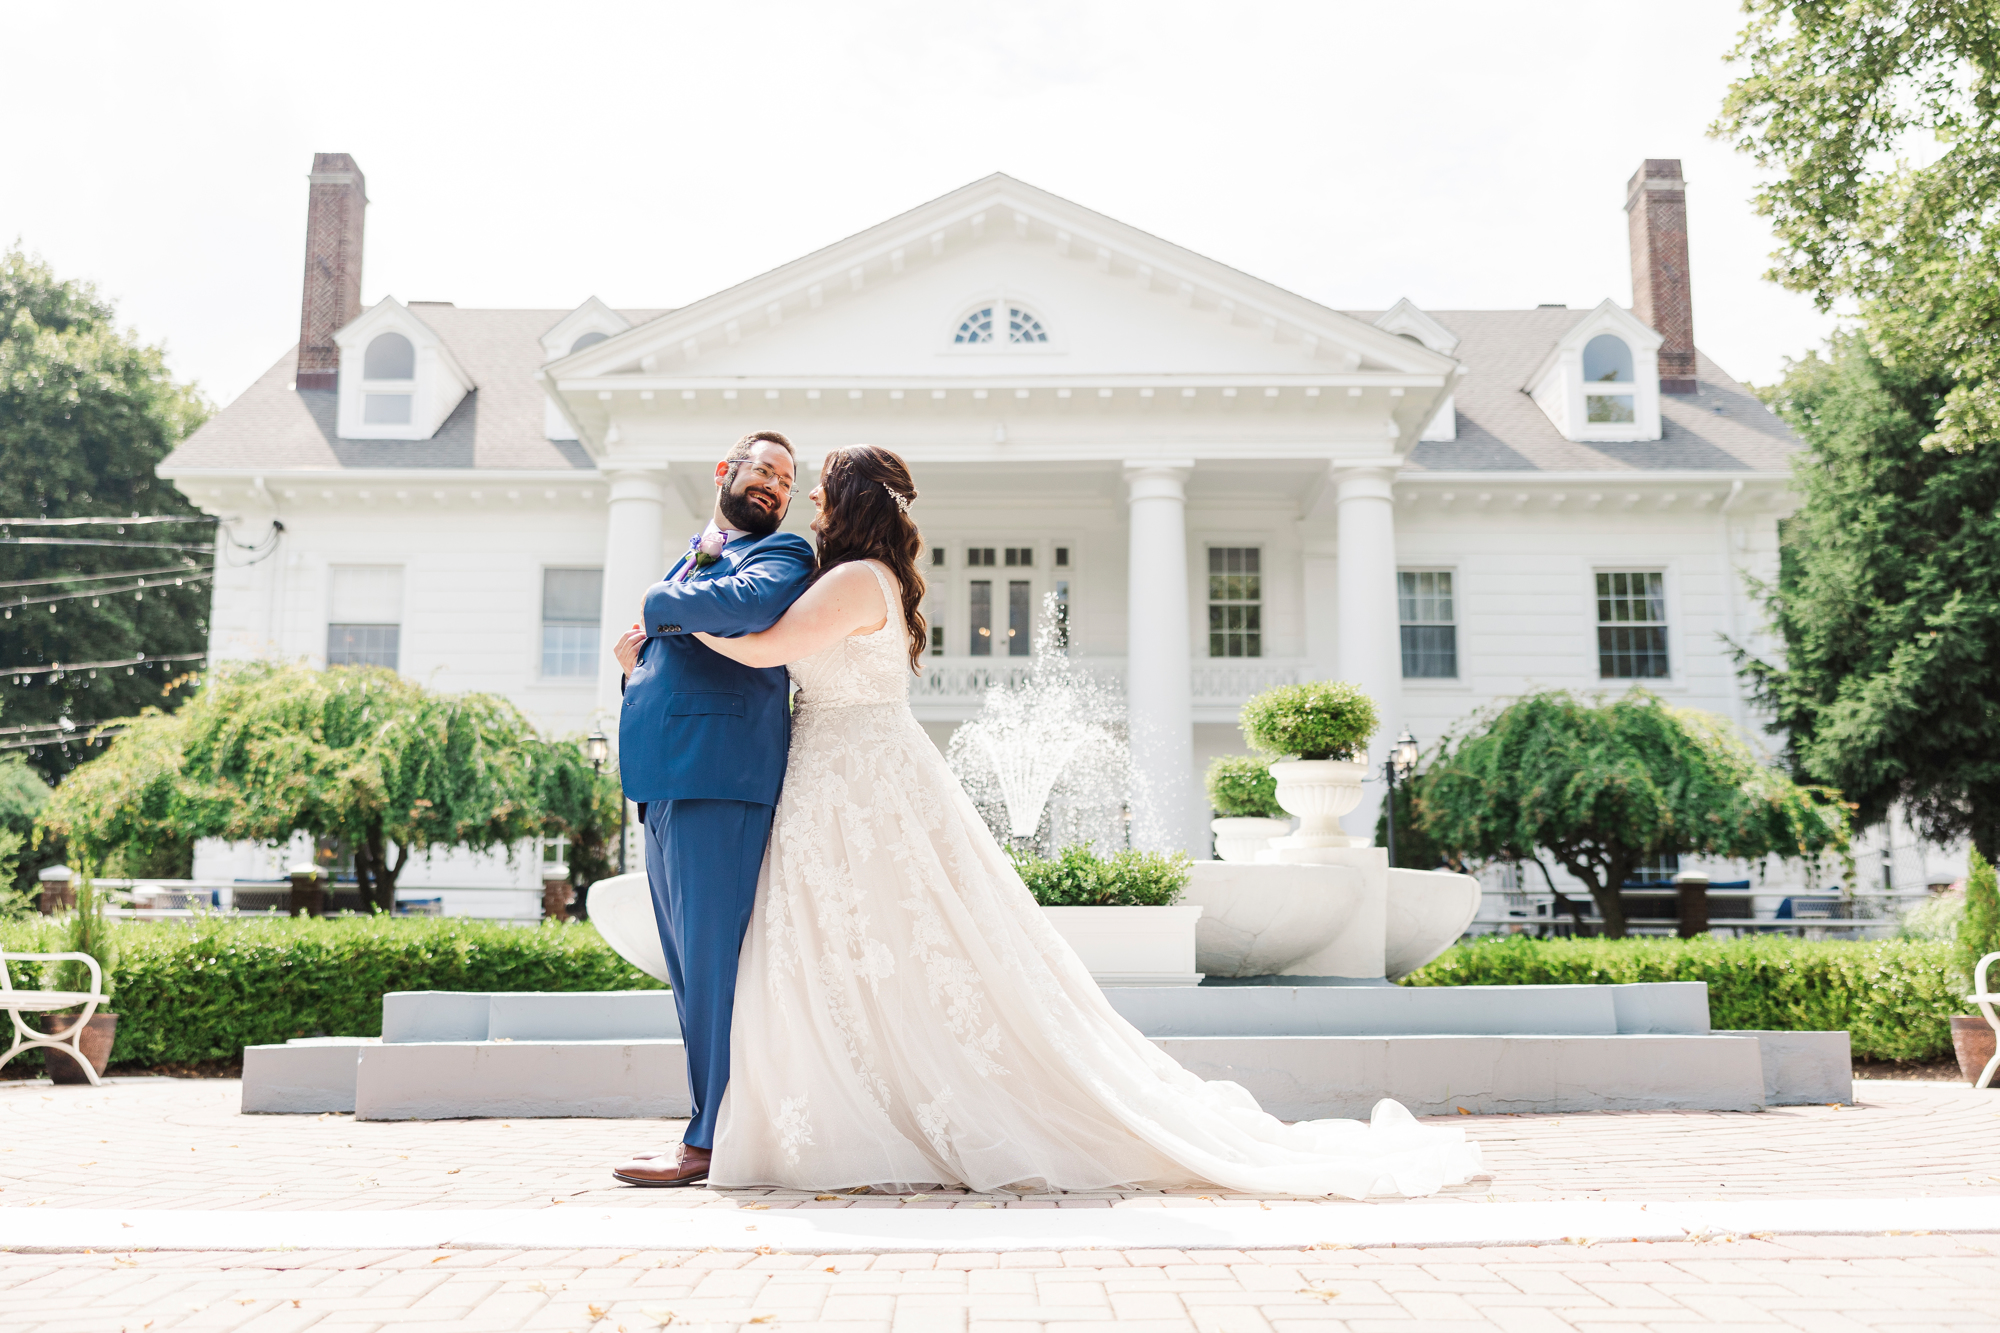 Whimsical Wedding at Briarcliff Manor in New York